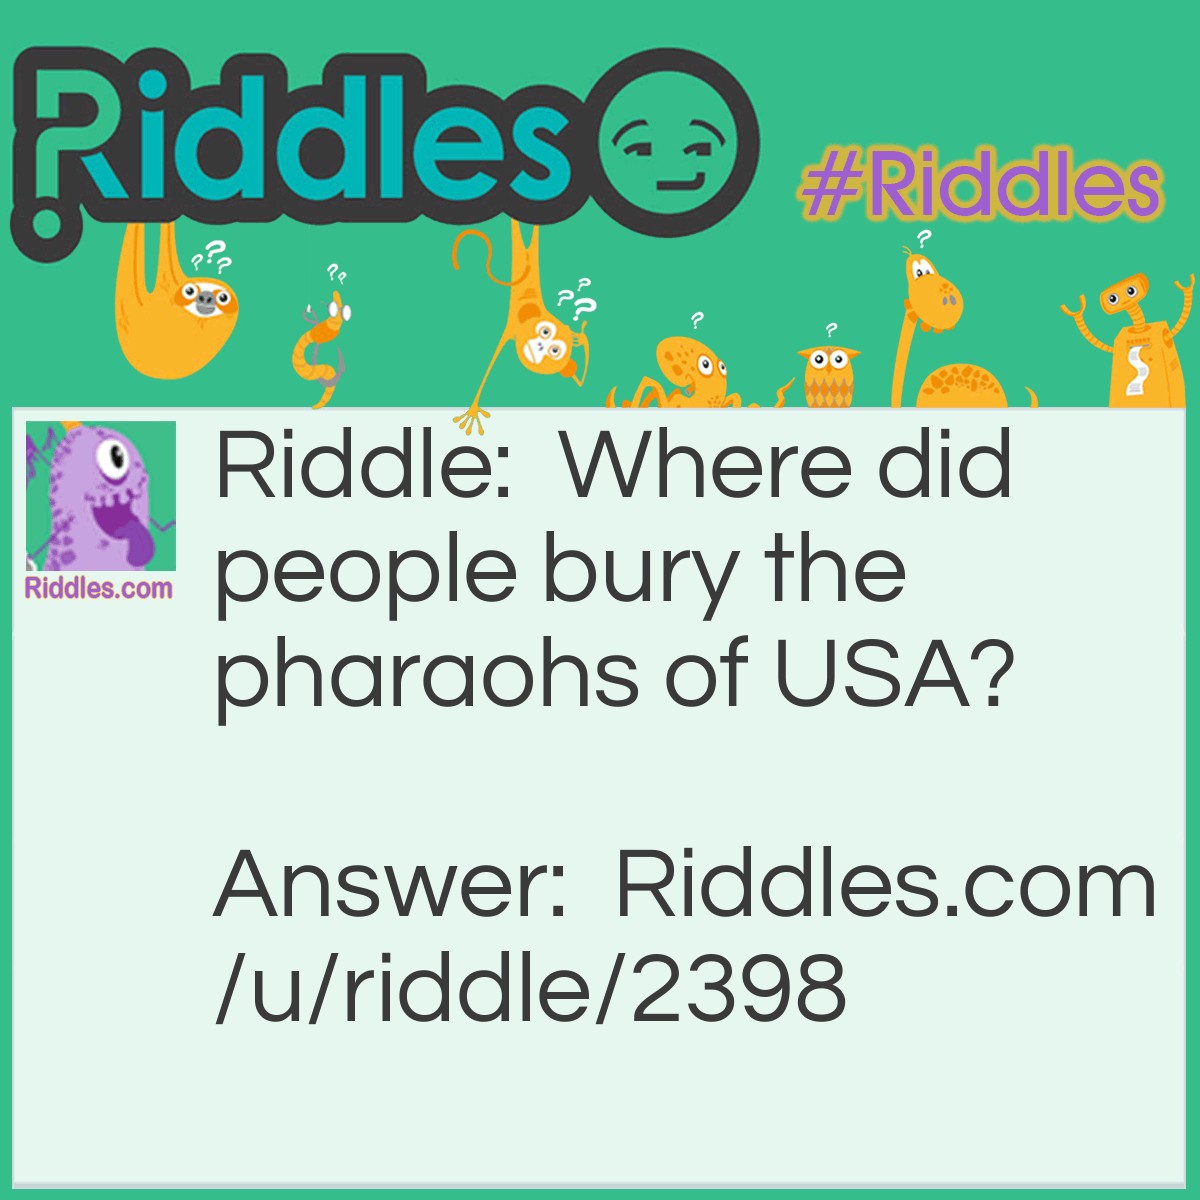 Riddle: Where did people bury the pharaohs of USA? Answer: Pharaohs were only in Egypt.